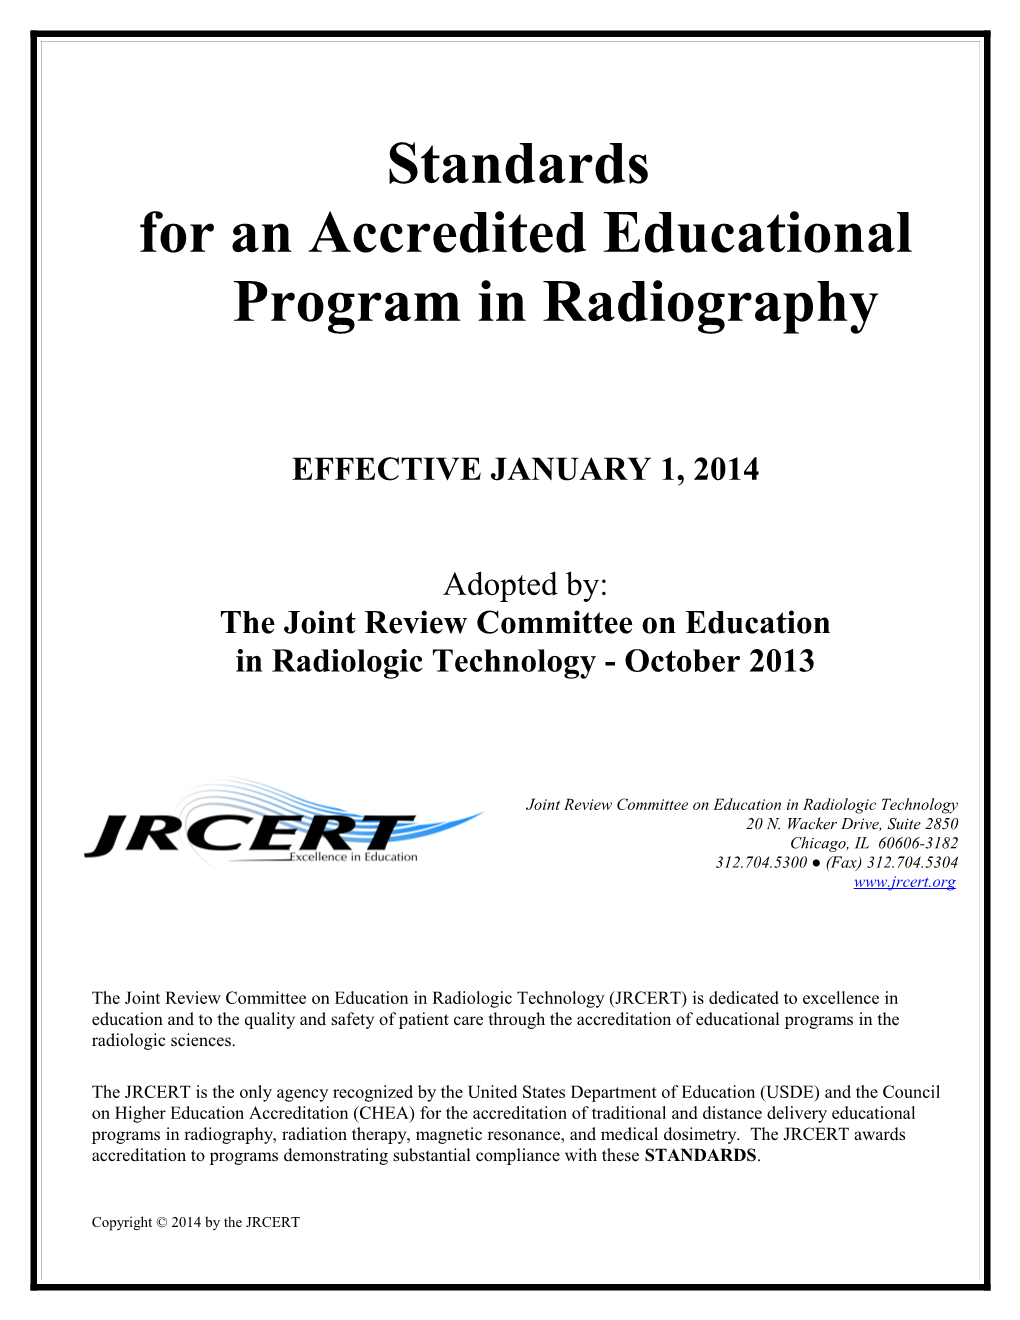 For an Accredited Educational Program in Radiography